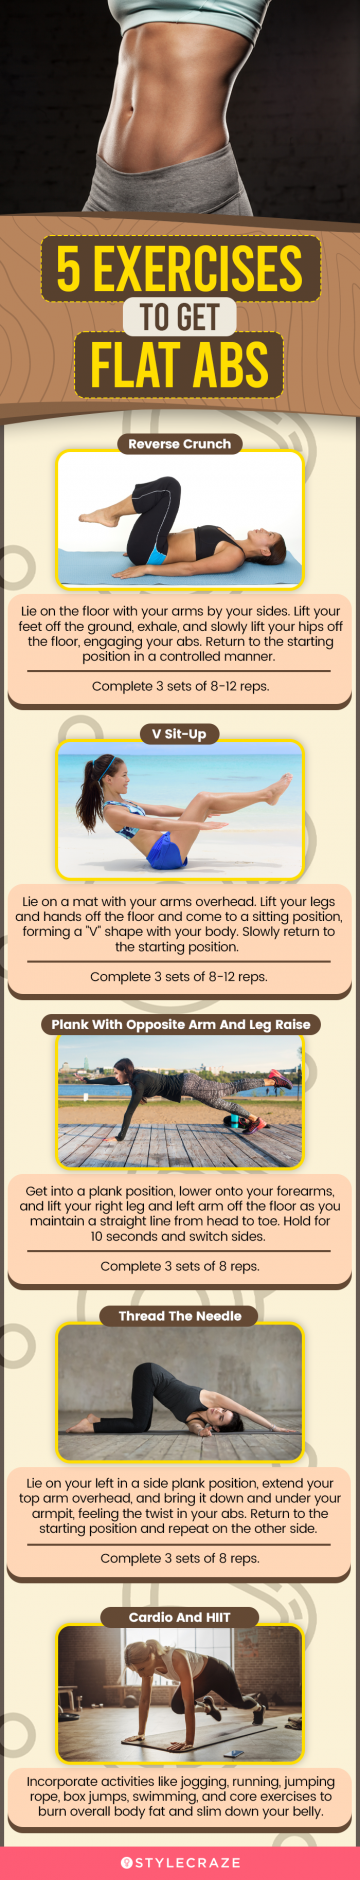 5 exercises to get flat abs (infographic)